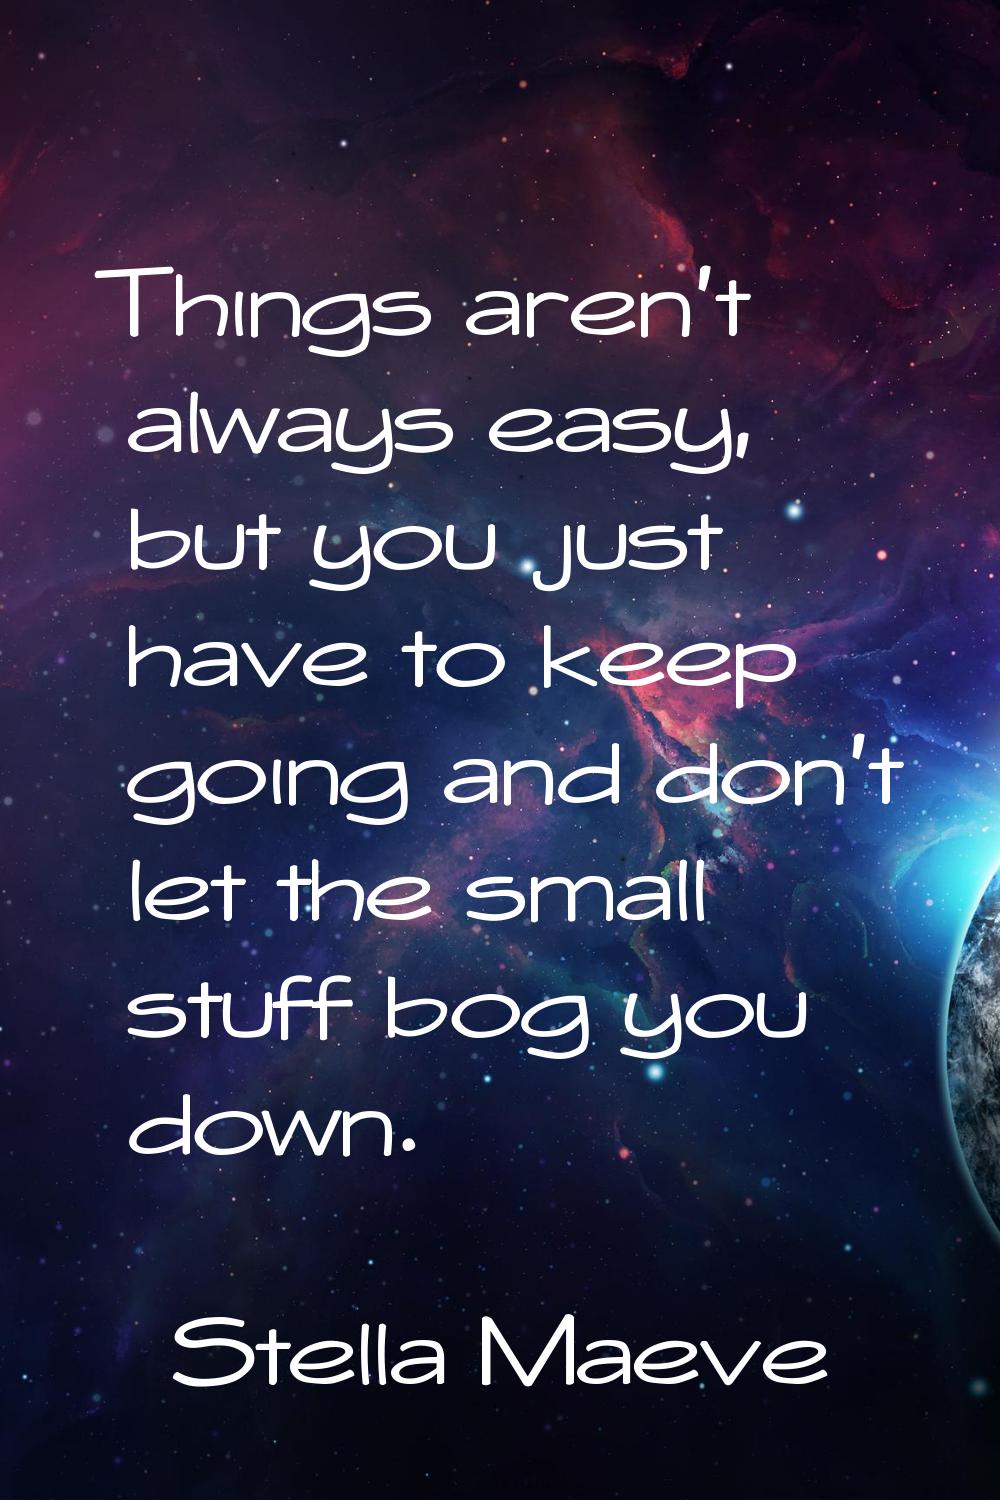 Things aren't always easy, but you just have to keep going and don't let the small stuff bog you do